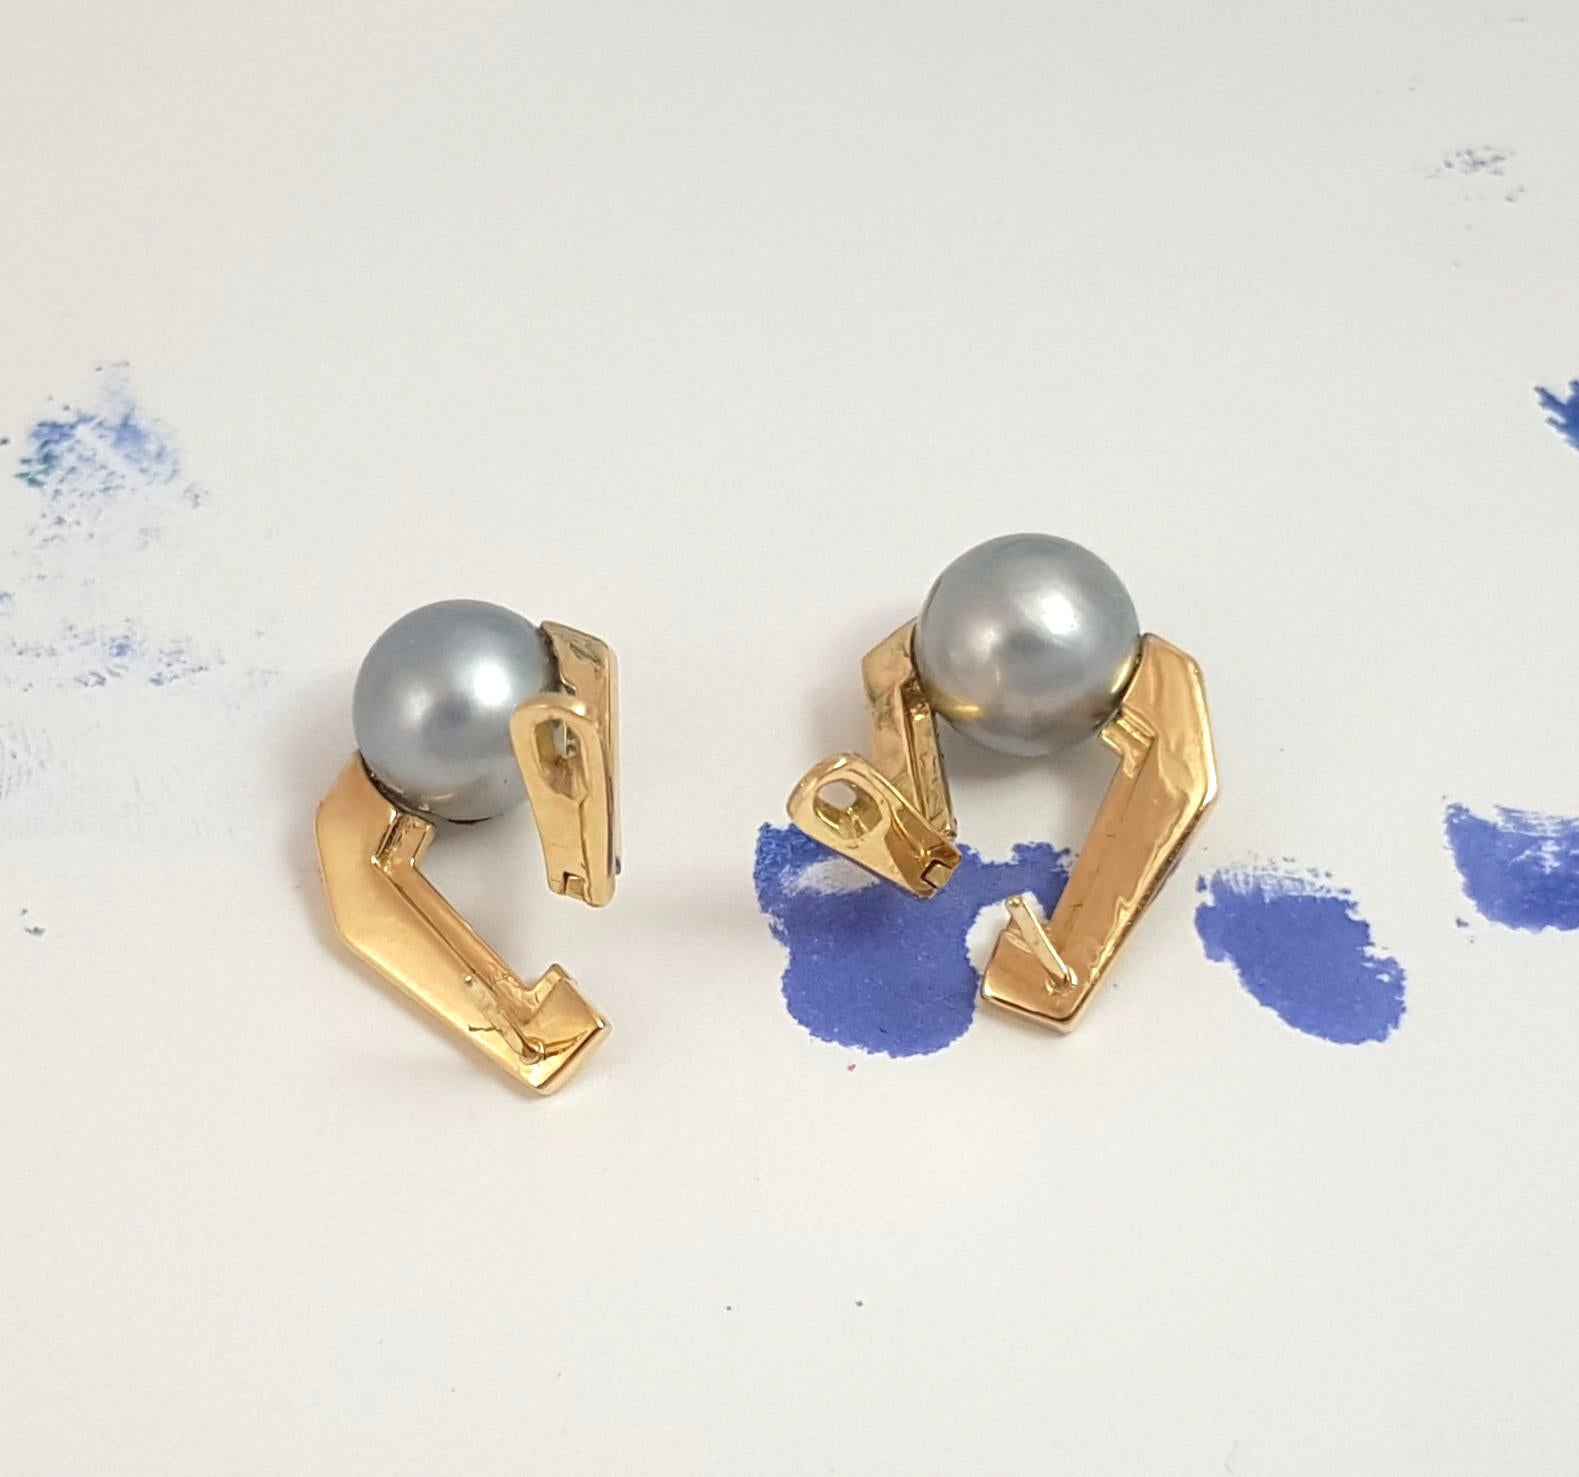 Origami Link no. 5 South Sea Pearl with Blue Sapphire Earrings set in 18K Gold 1